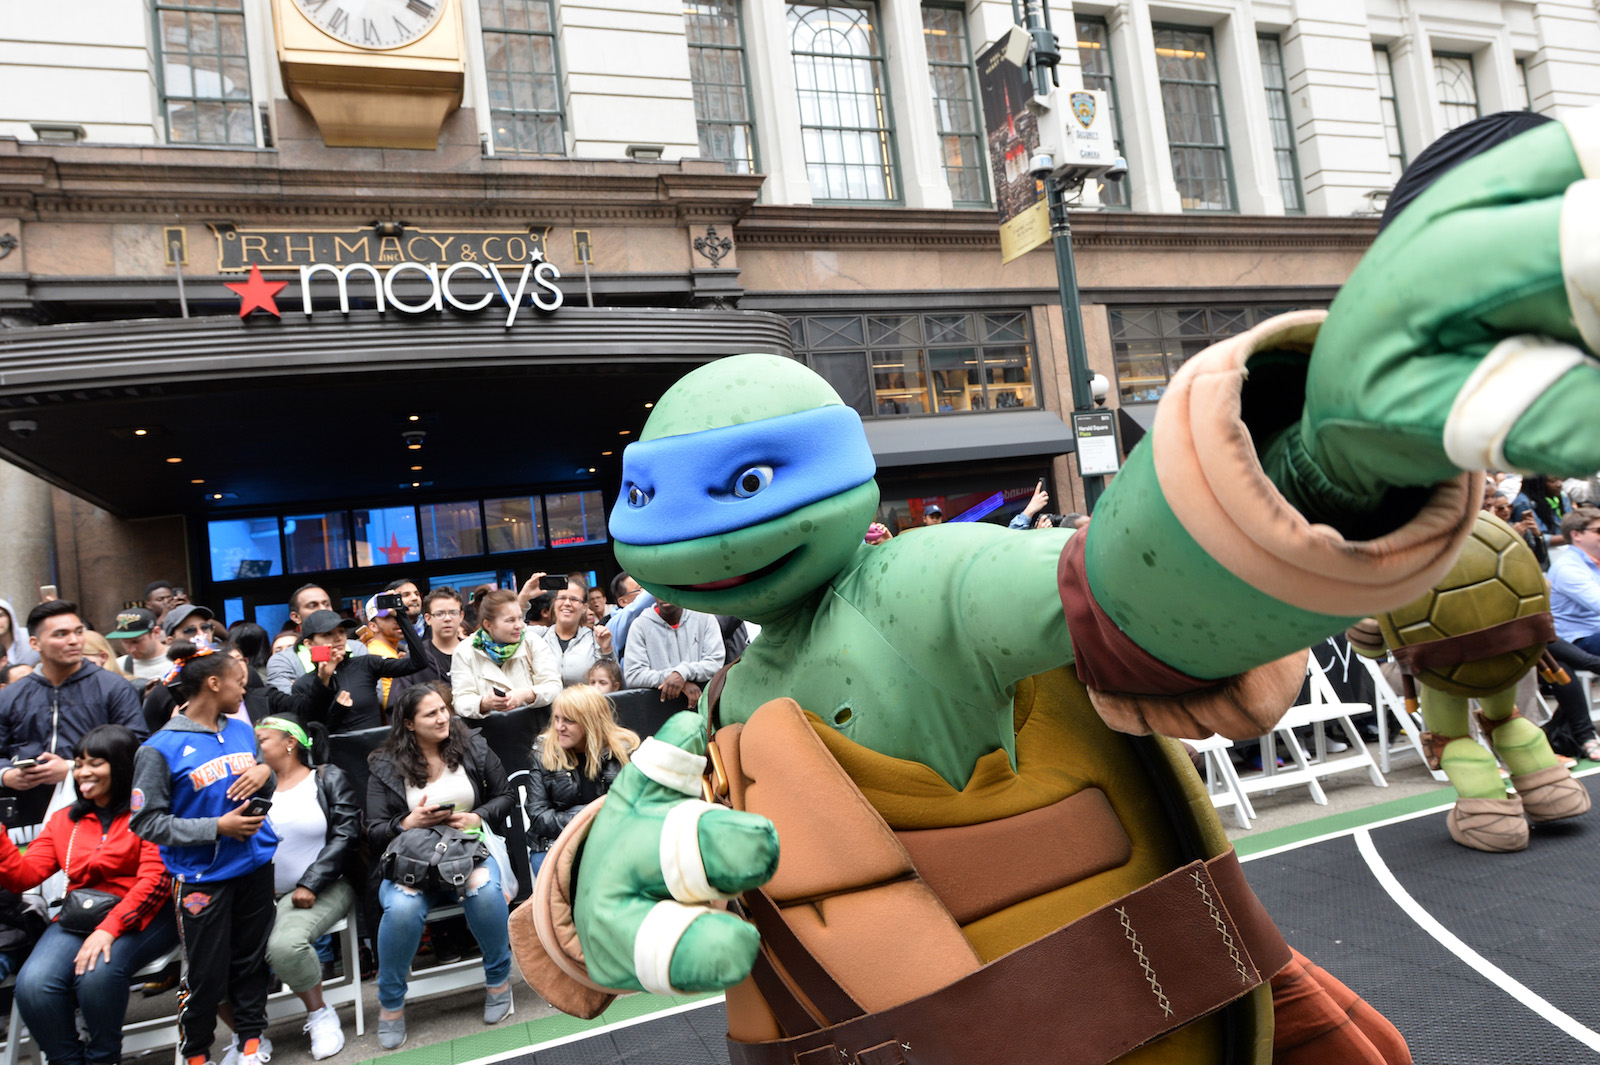 a person in a teenage mutant ninja turtle costume points into the crowd in front of a macy's department store